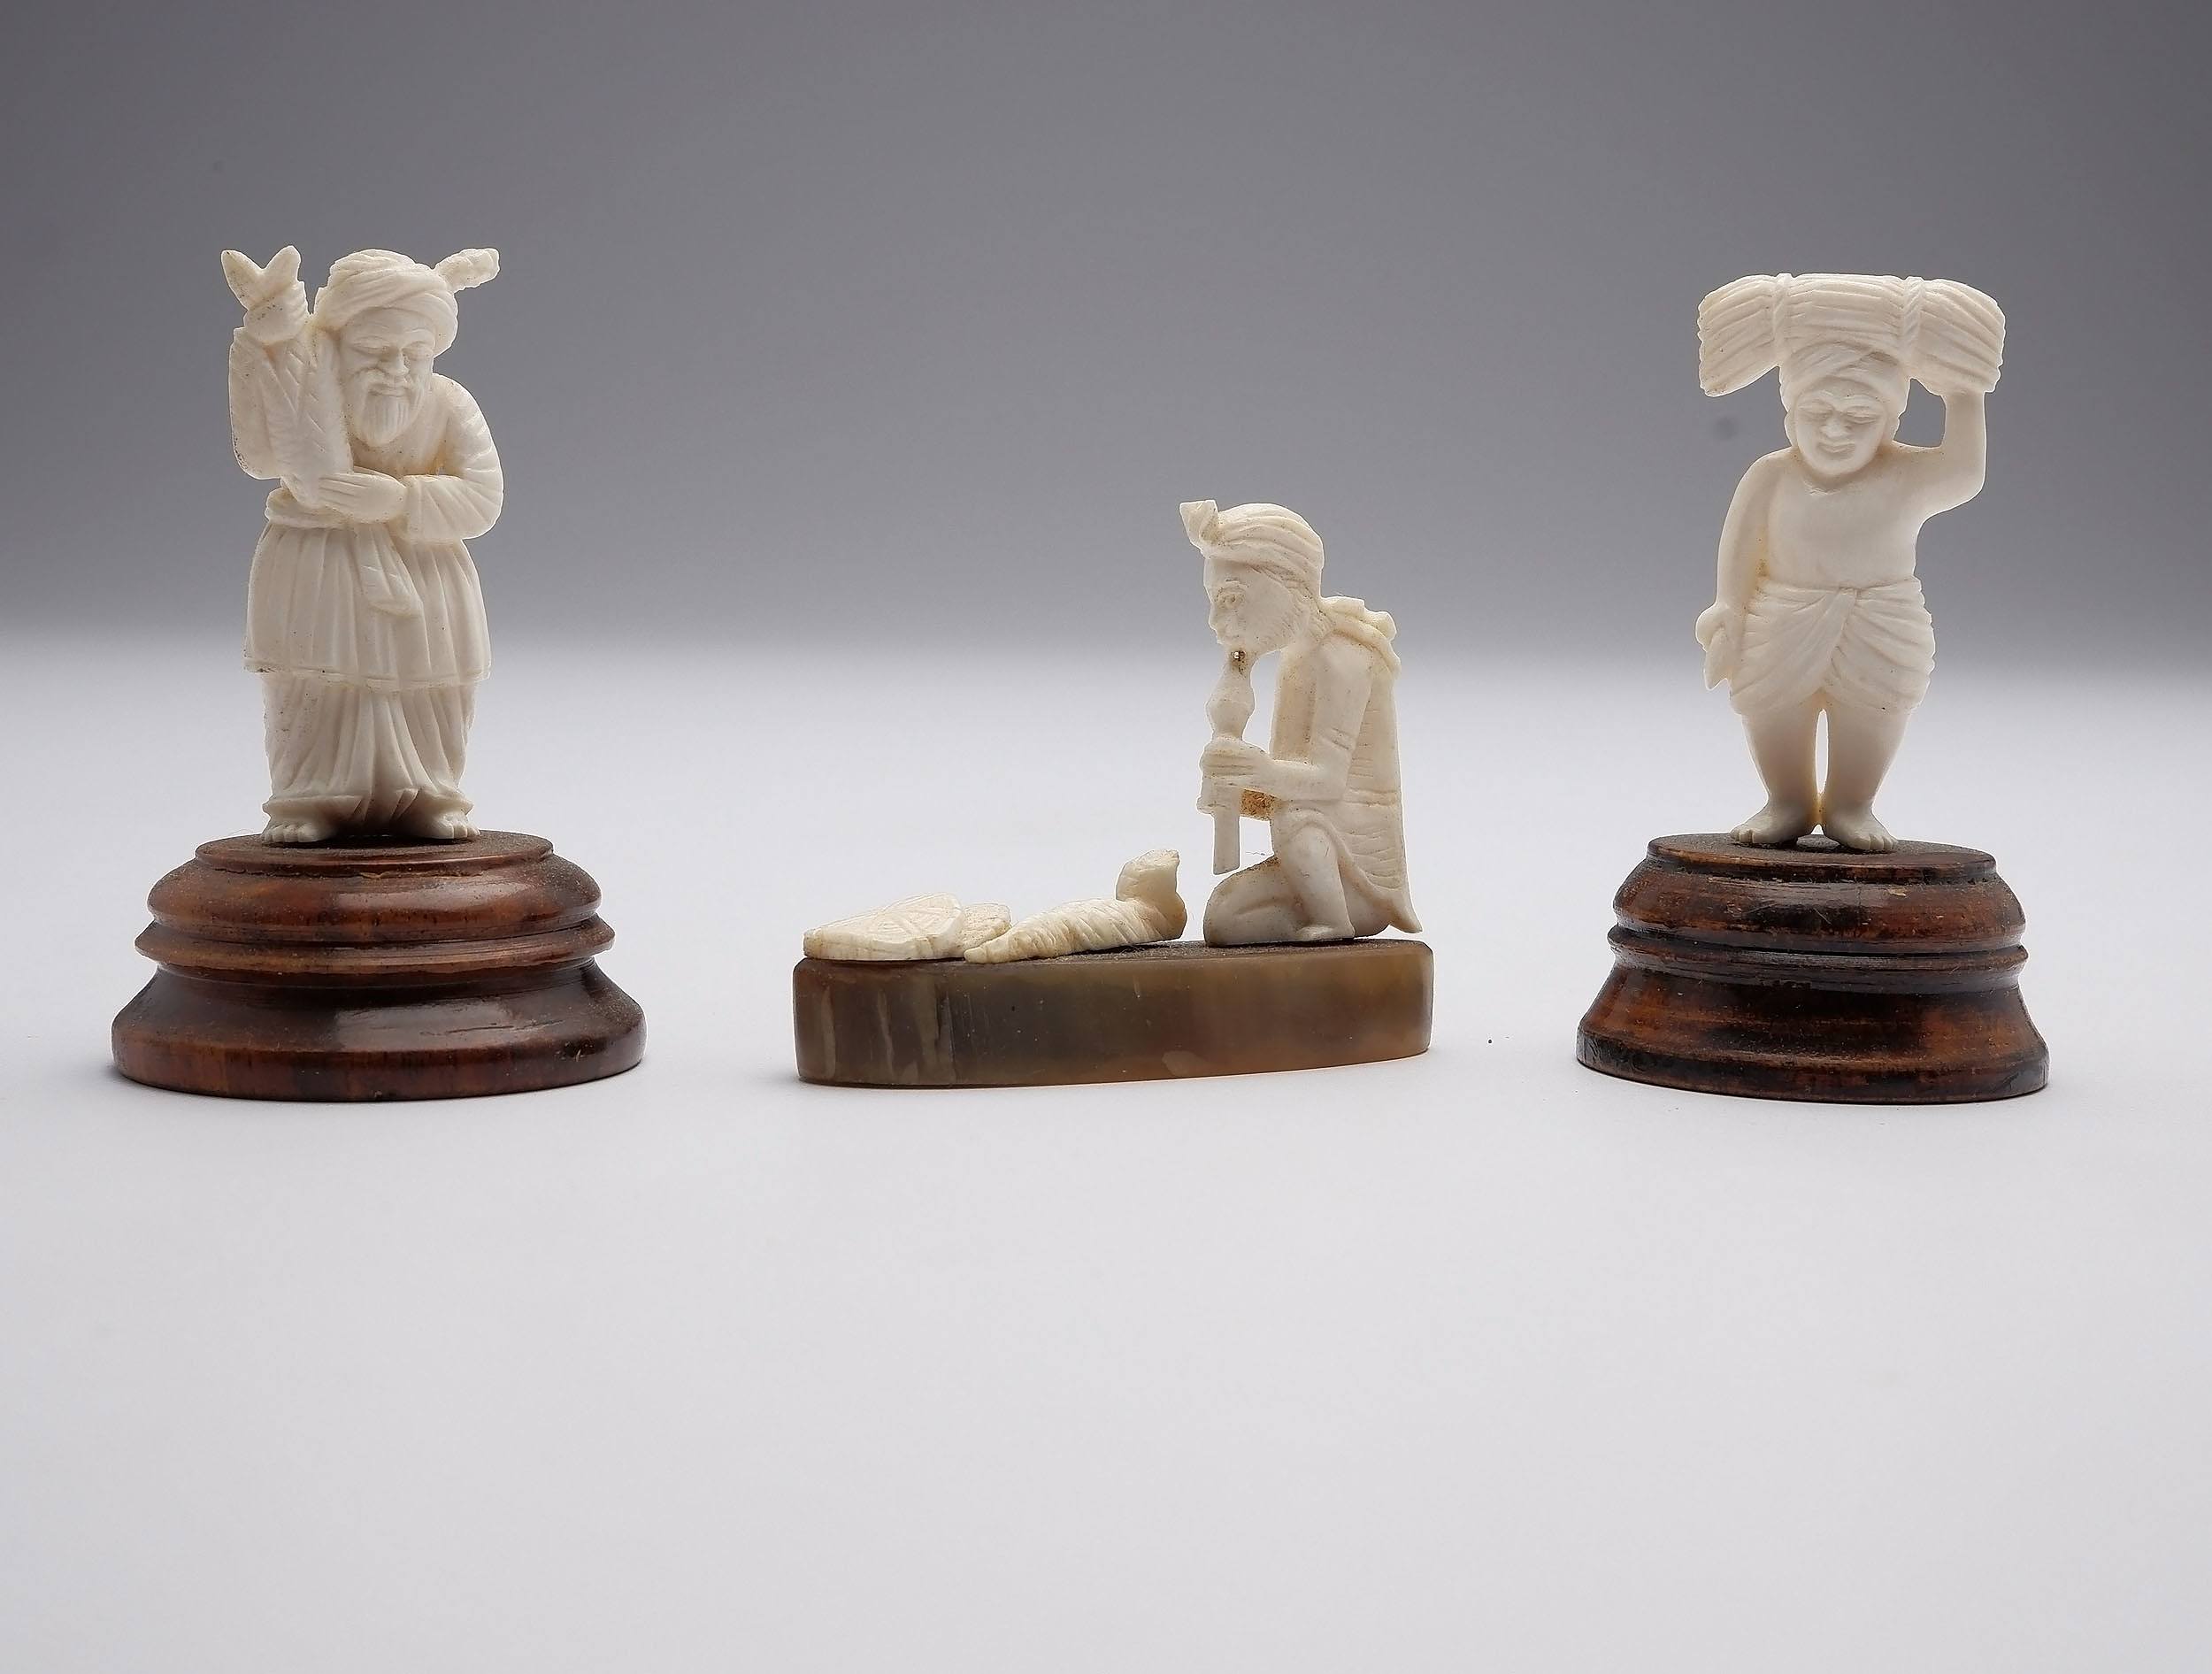 'Three Carved Indian Ivory Figures Including a Snake Charmer, Early to Mid 20th Century'